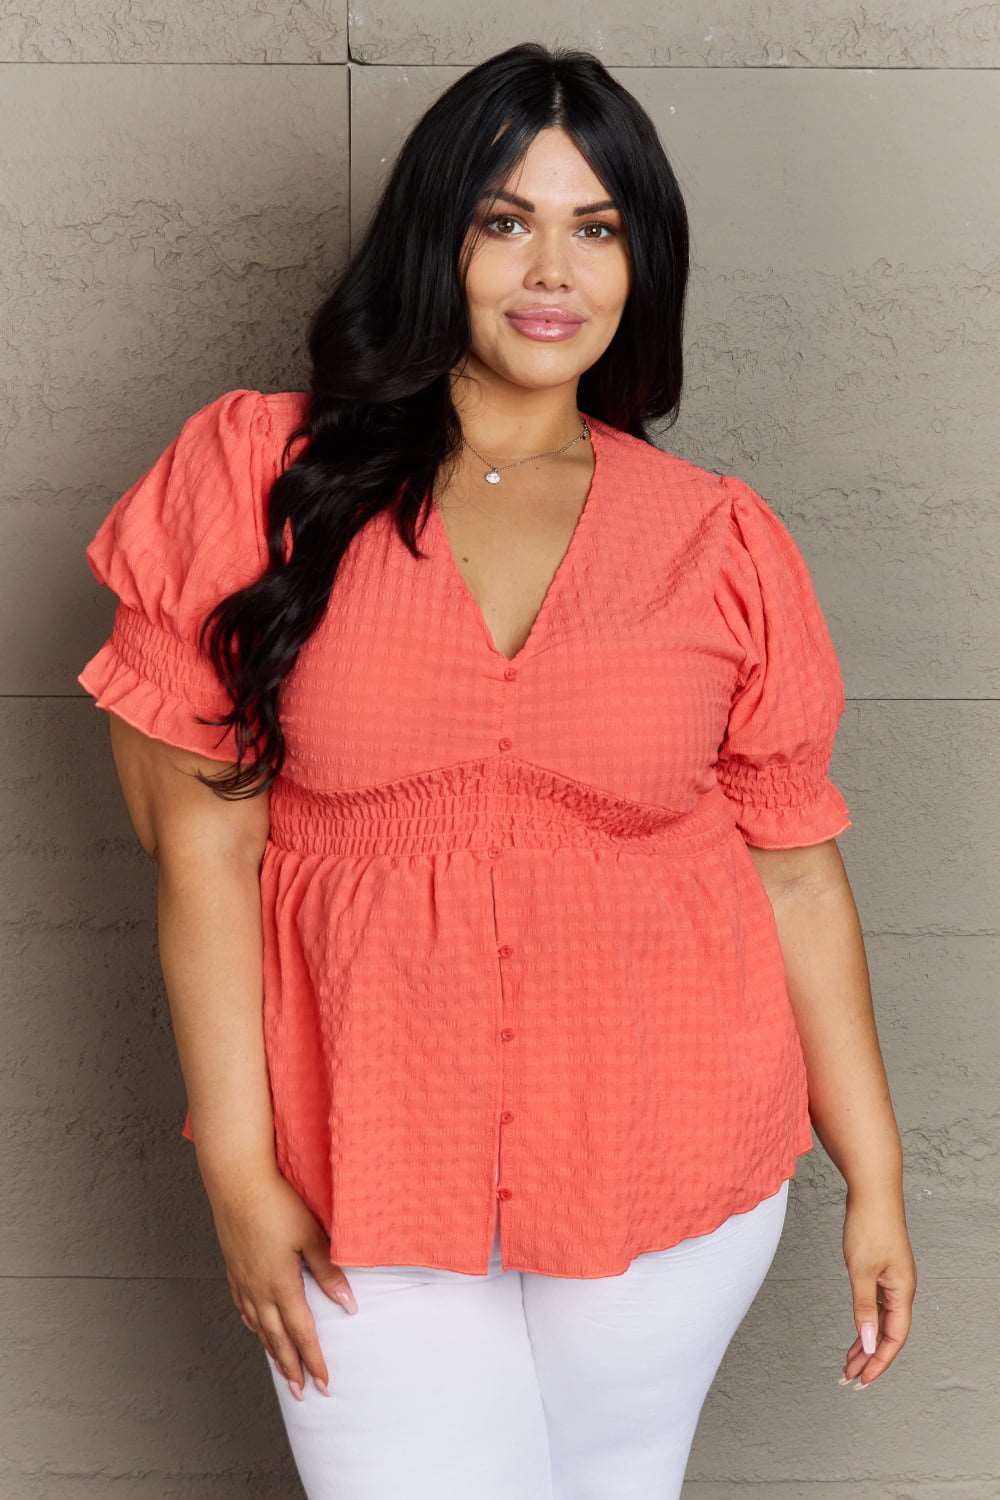 Culture Code Whimsical Wonders Full Size V-Neck Puff Sleeve Button Down Top  Krazy Heart Designs Boutique Coral S 